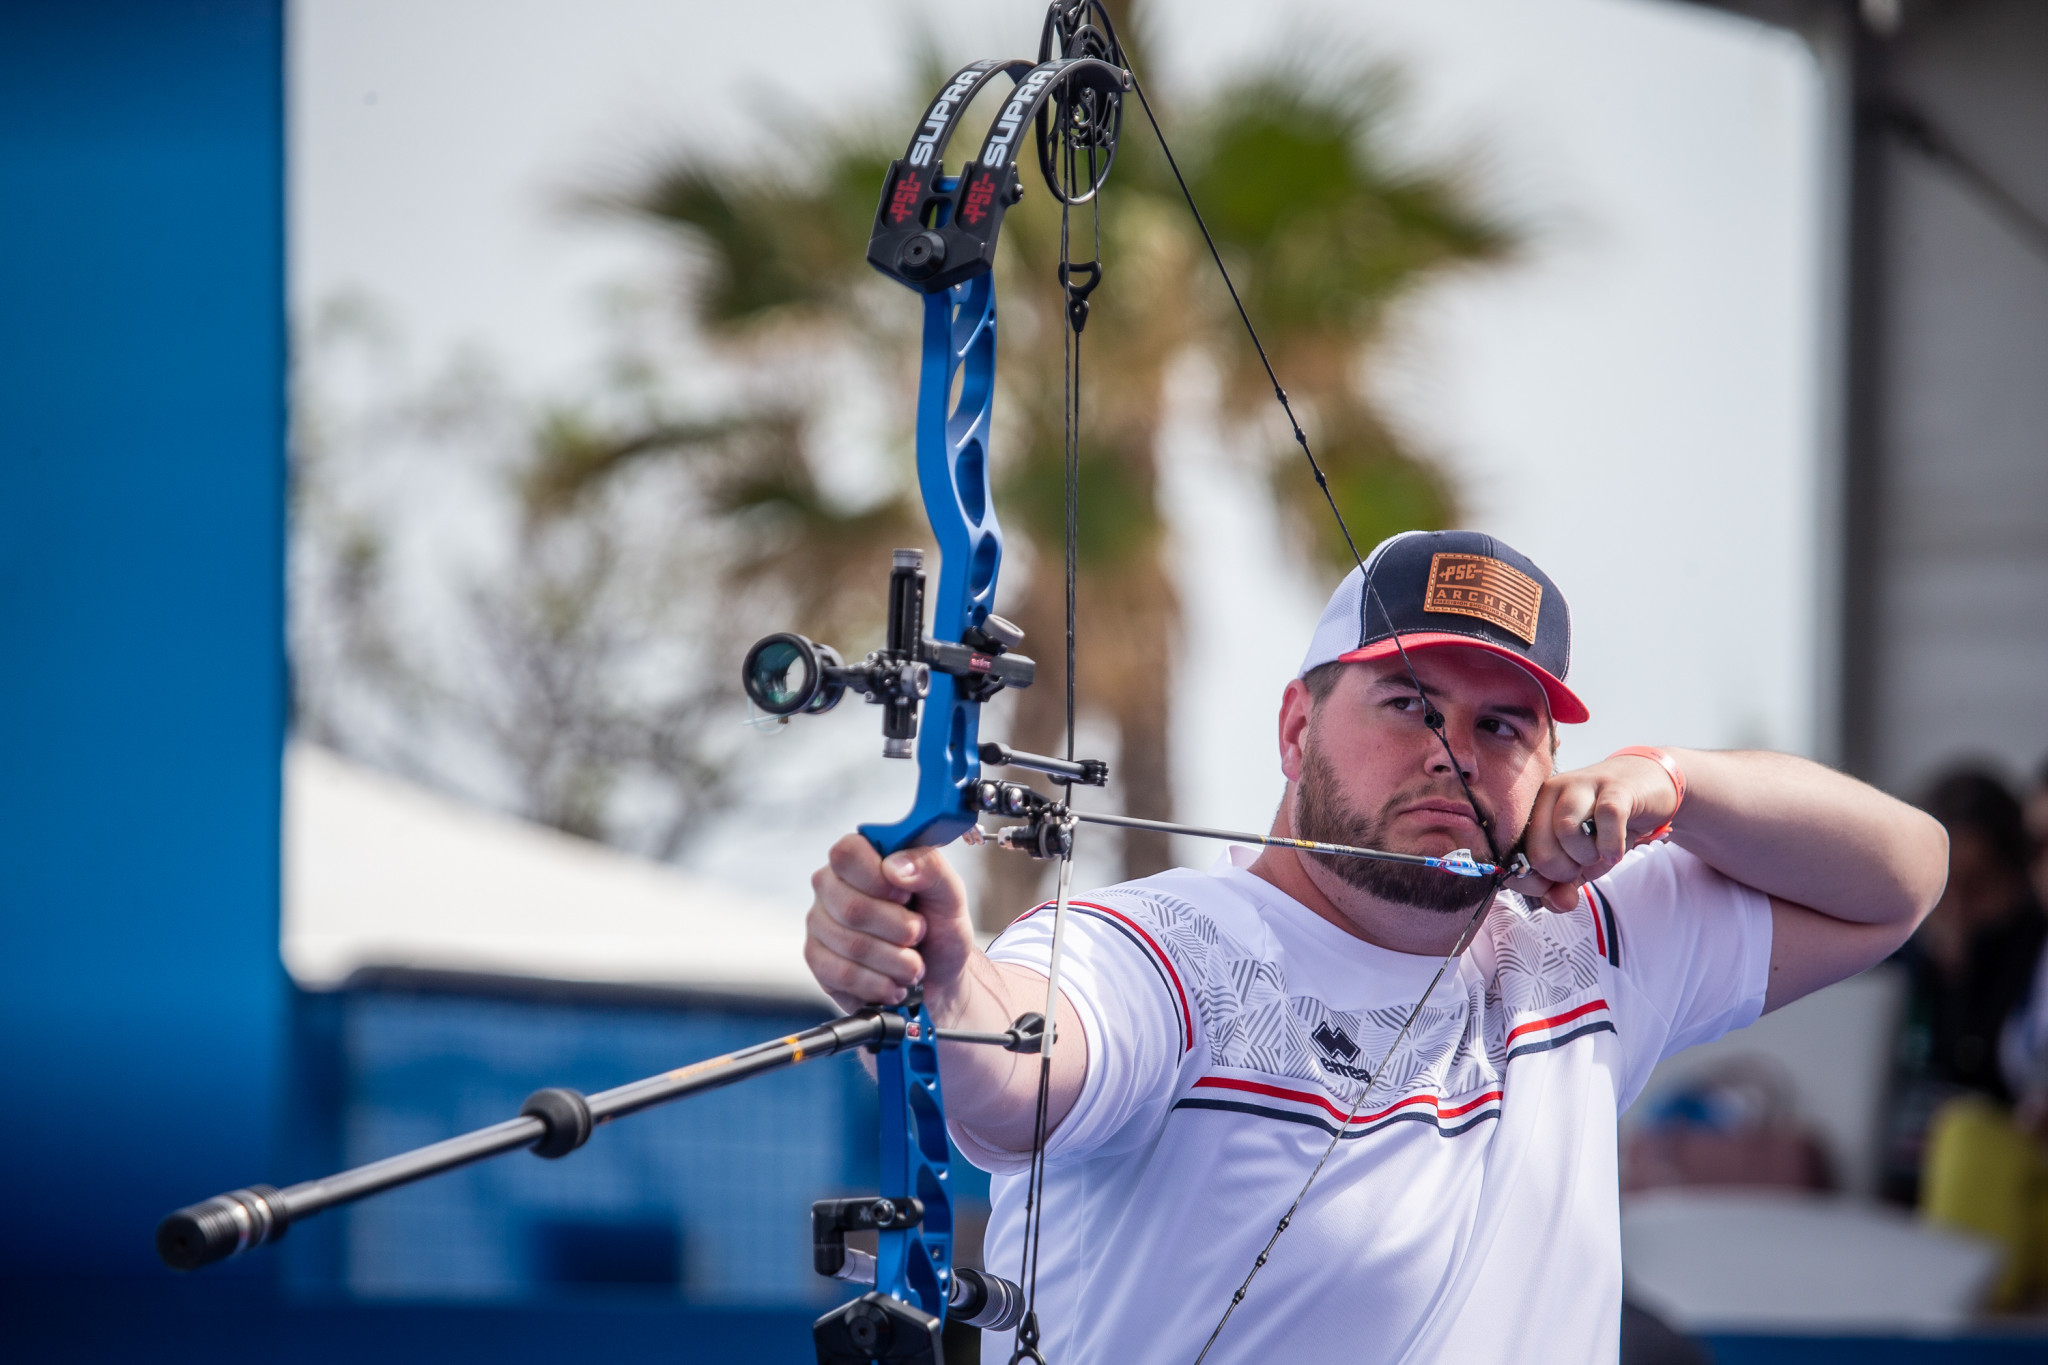 France to face Turkey for compound men’s team gold at Archery World Cup